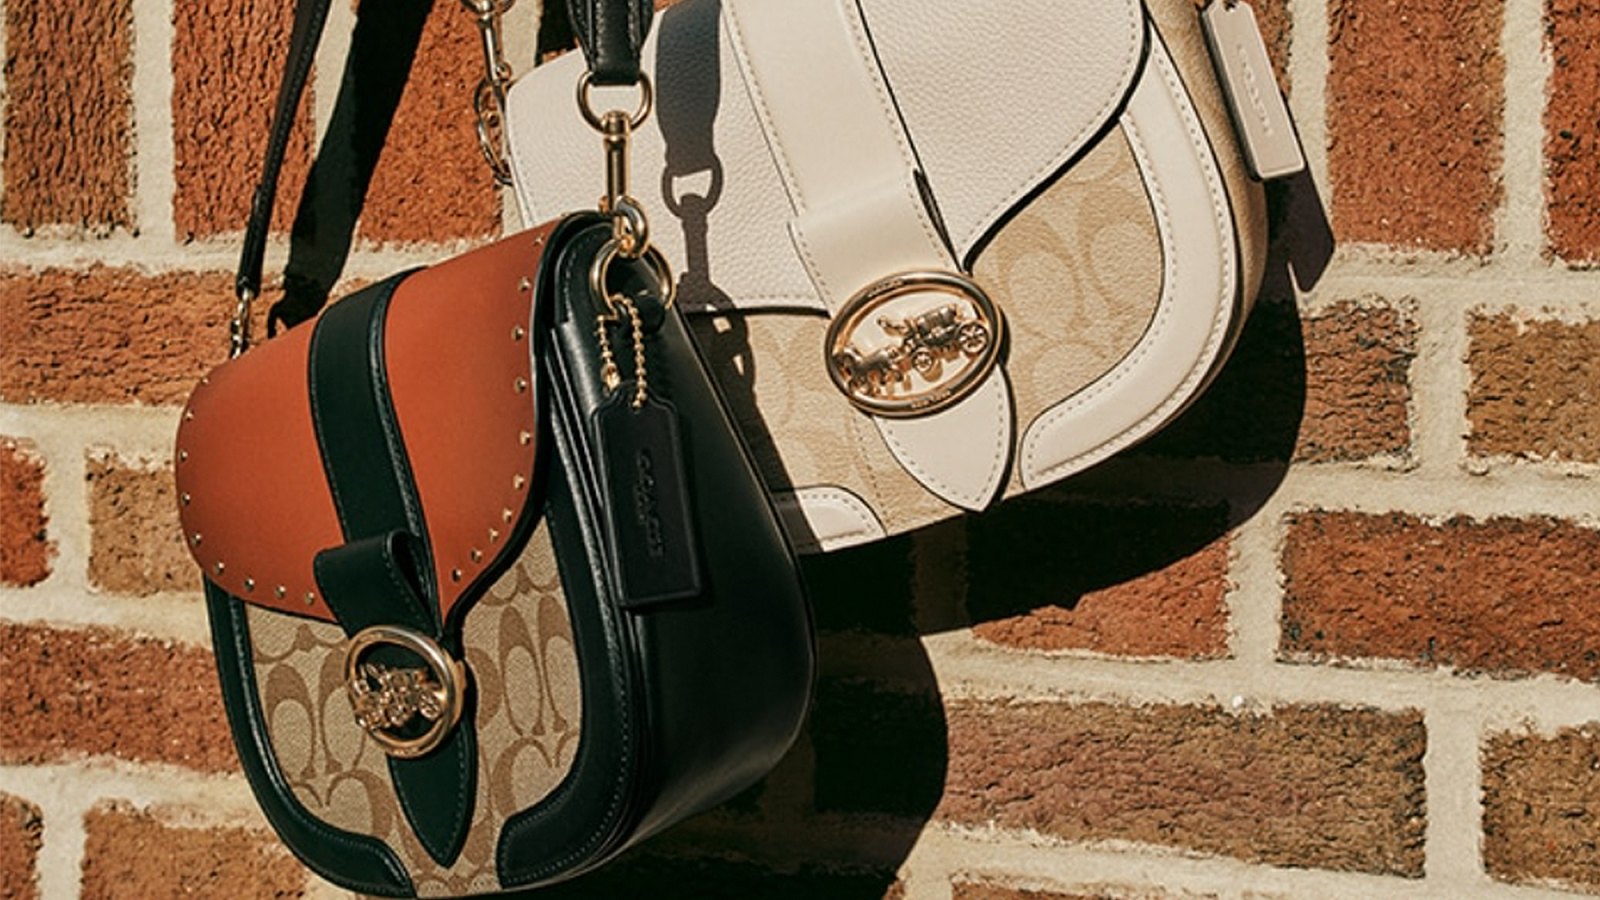 Brown leather bags will be everywhere this fall, and Coach Outlet